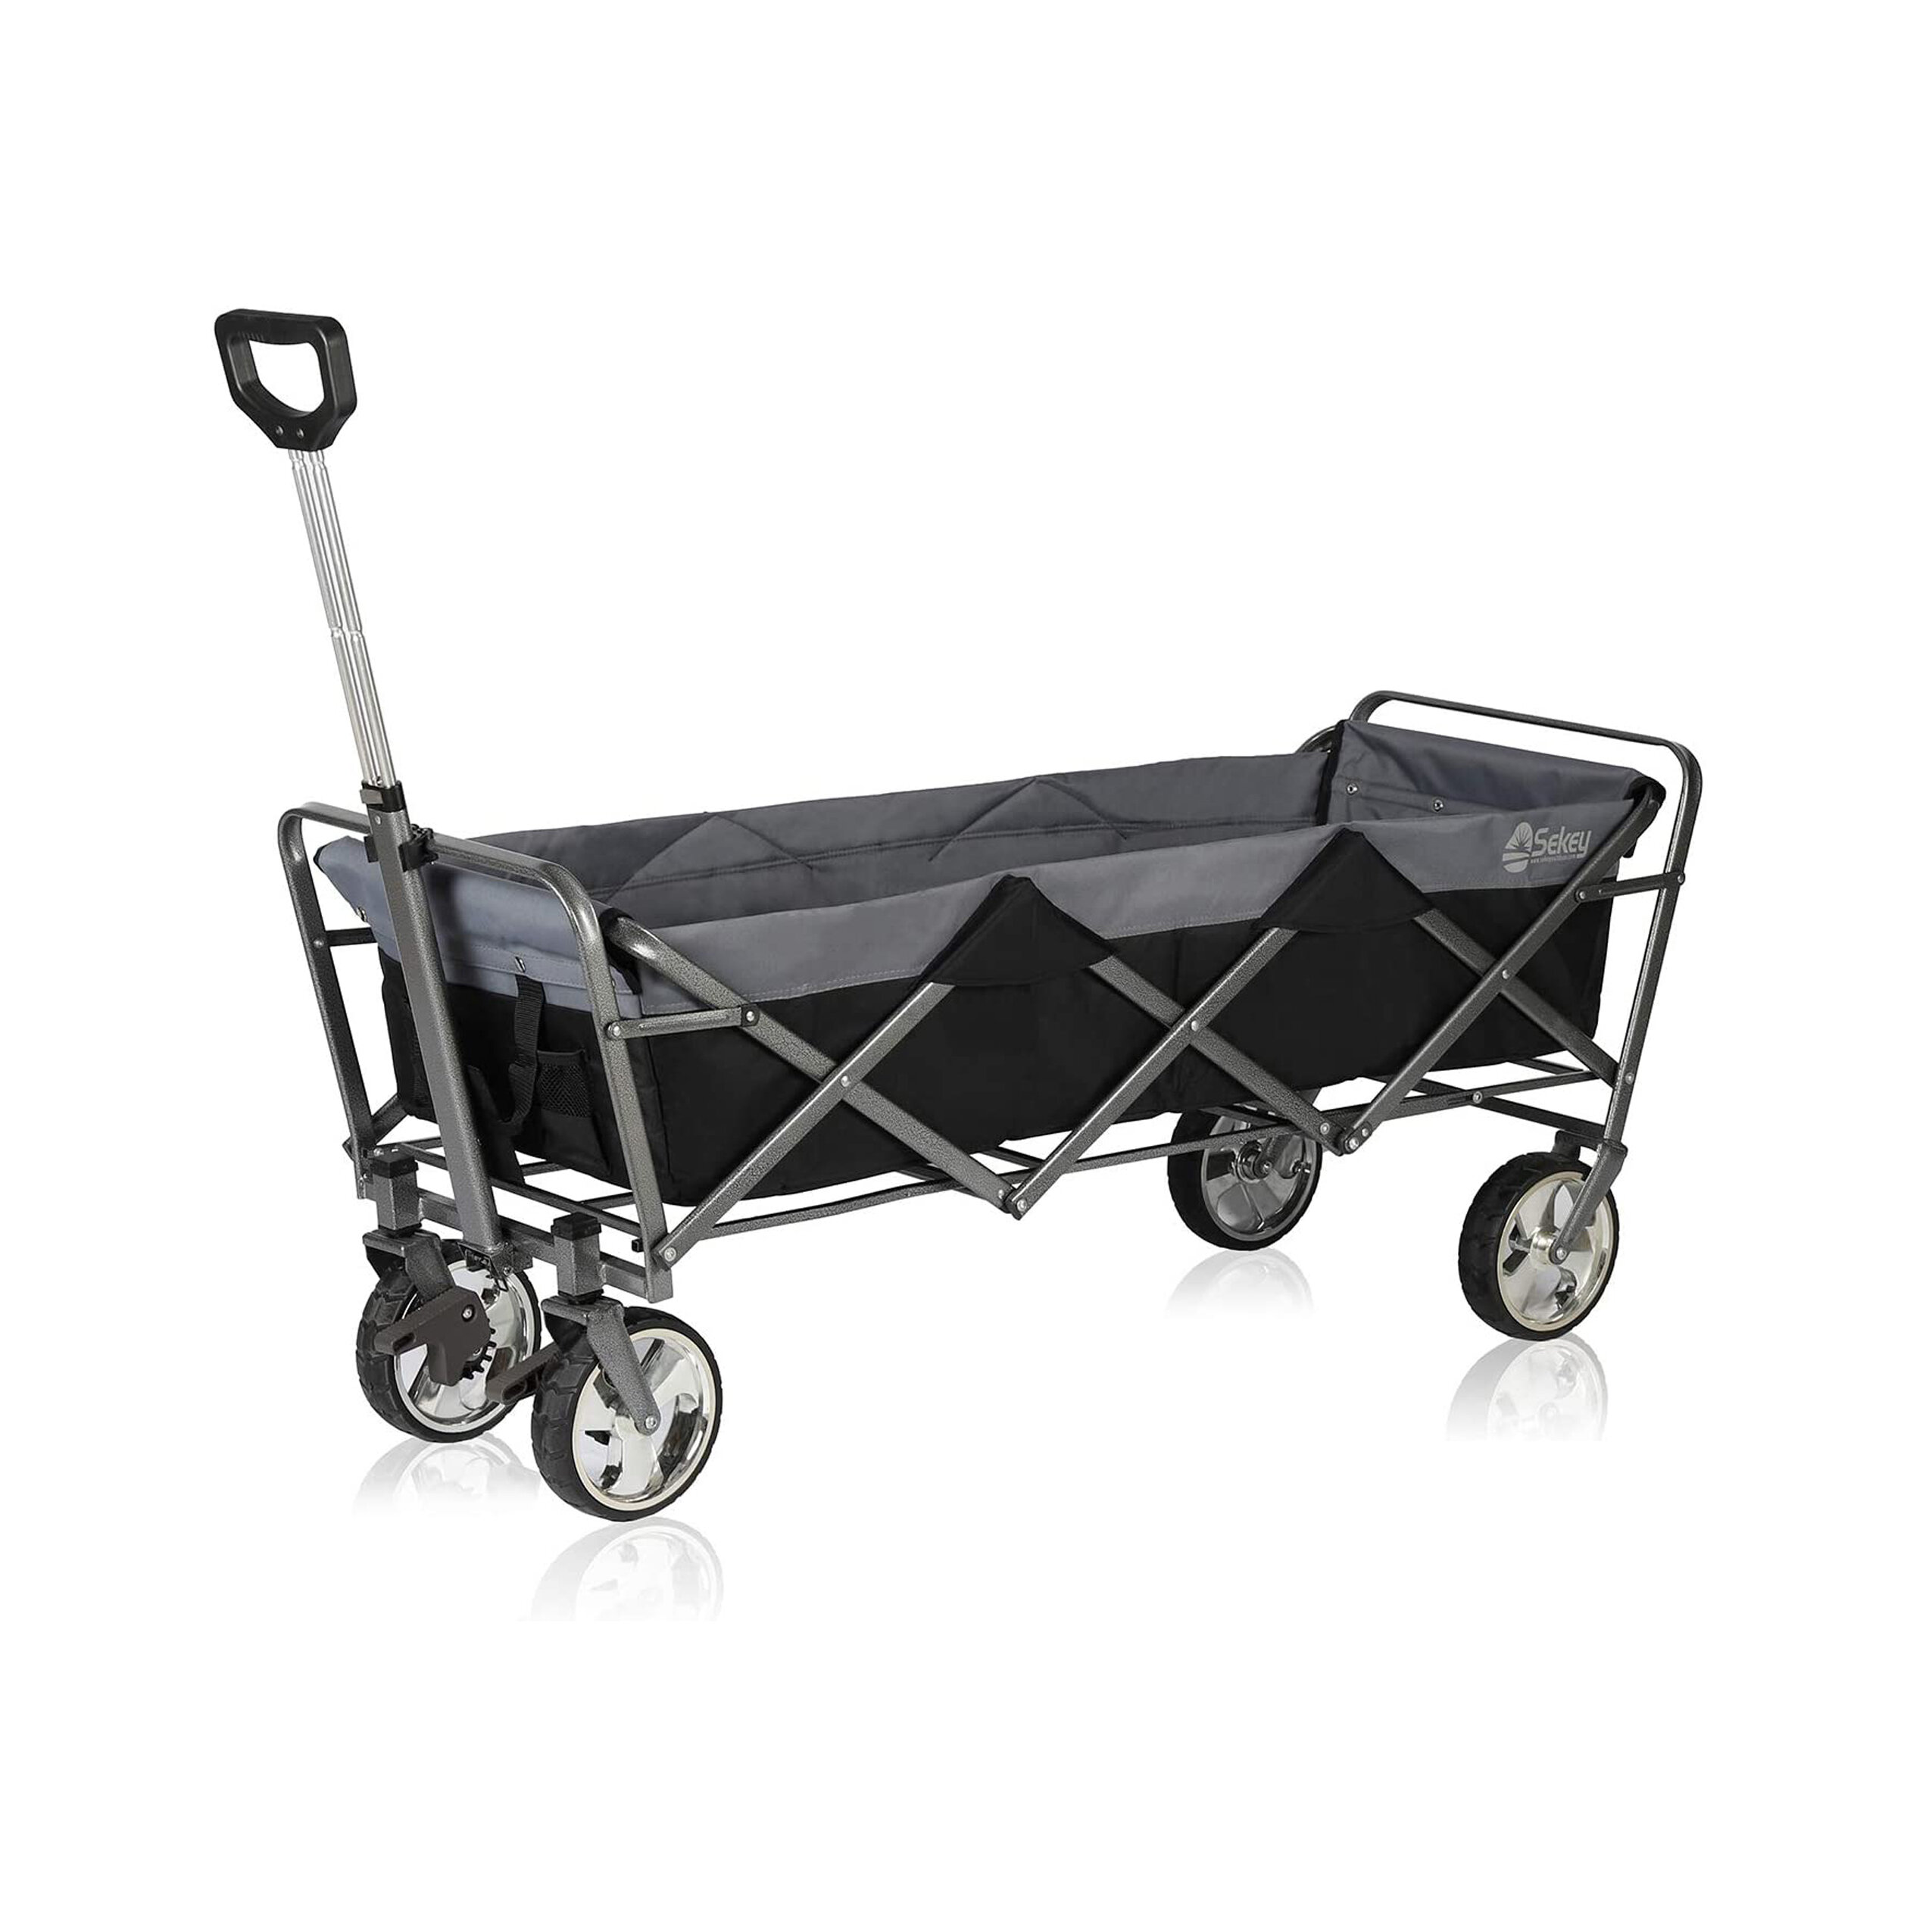 Sekey Foldable Handcart Outdoor Folding Trolley Transport Trolley with Brakes Large Wheels Suitable for All Terrain 